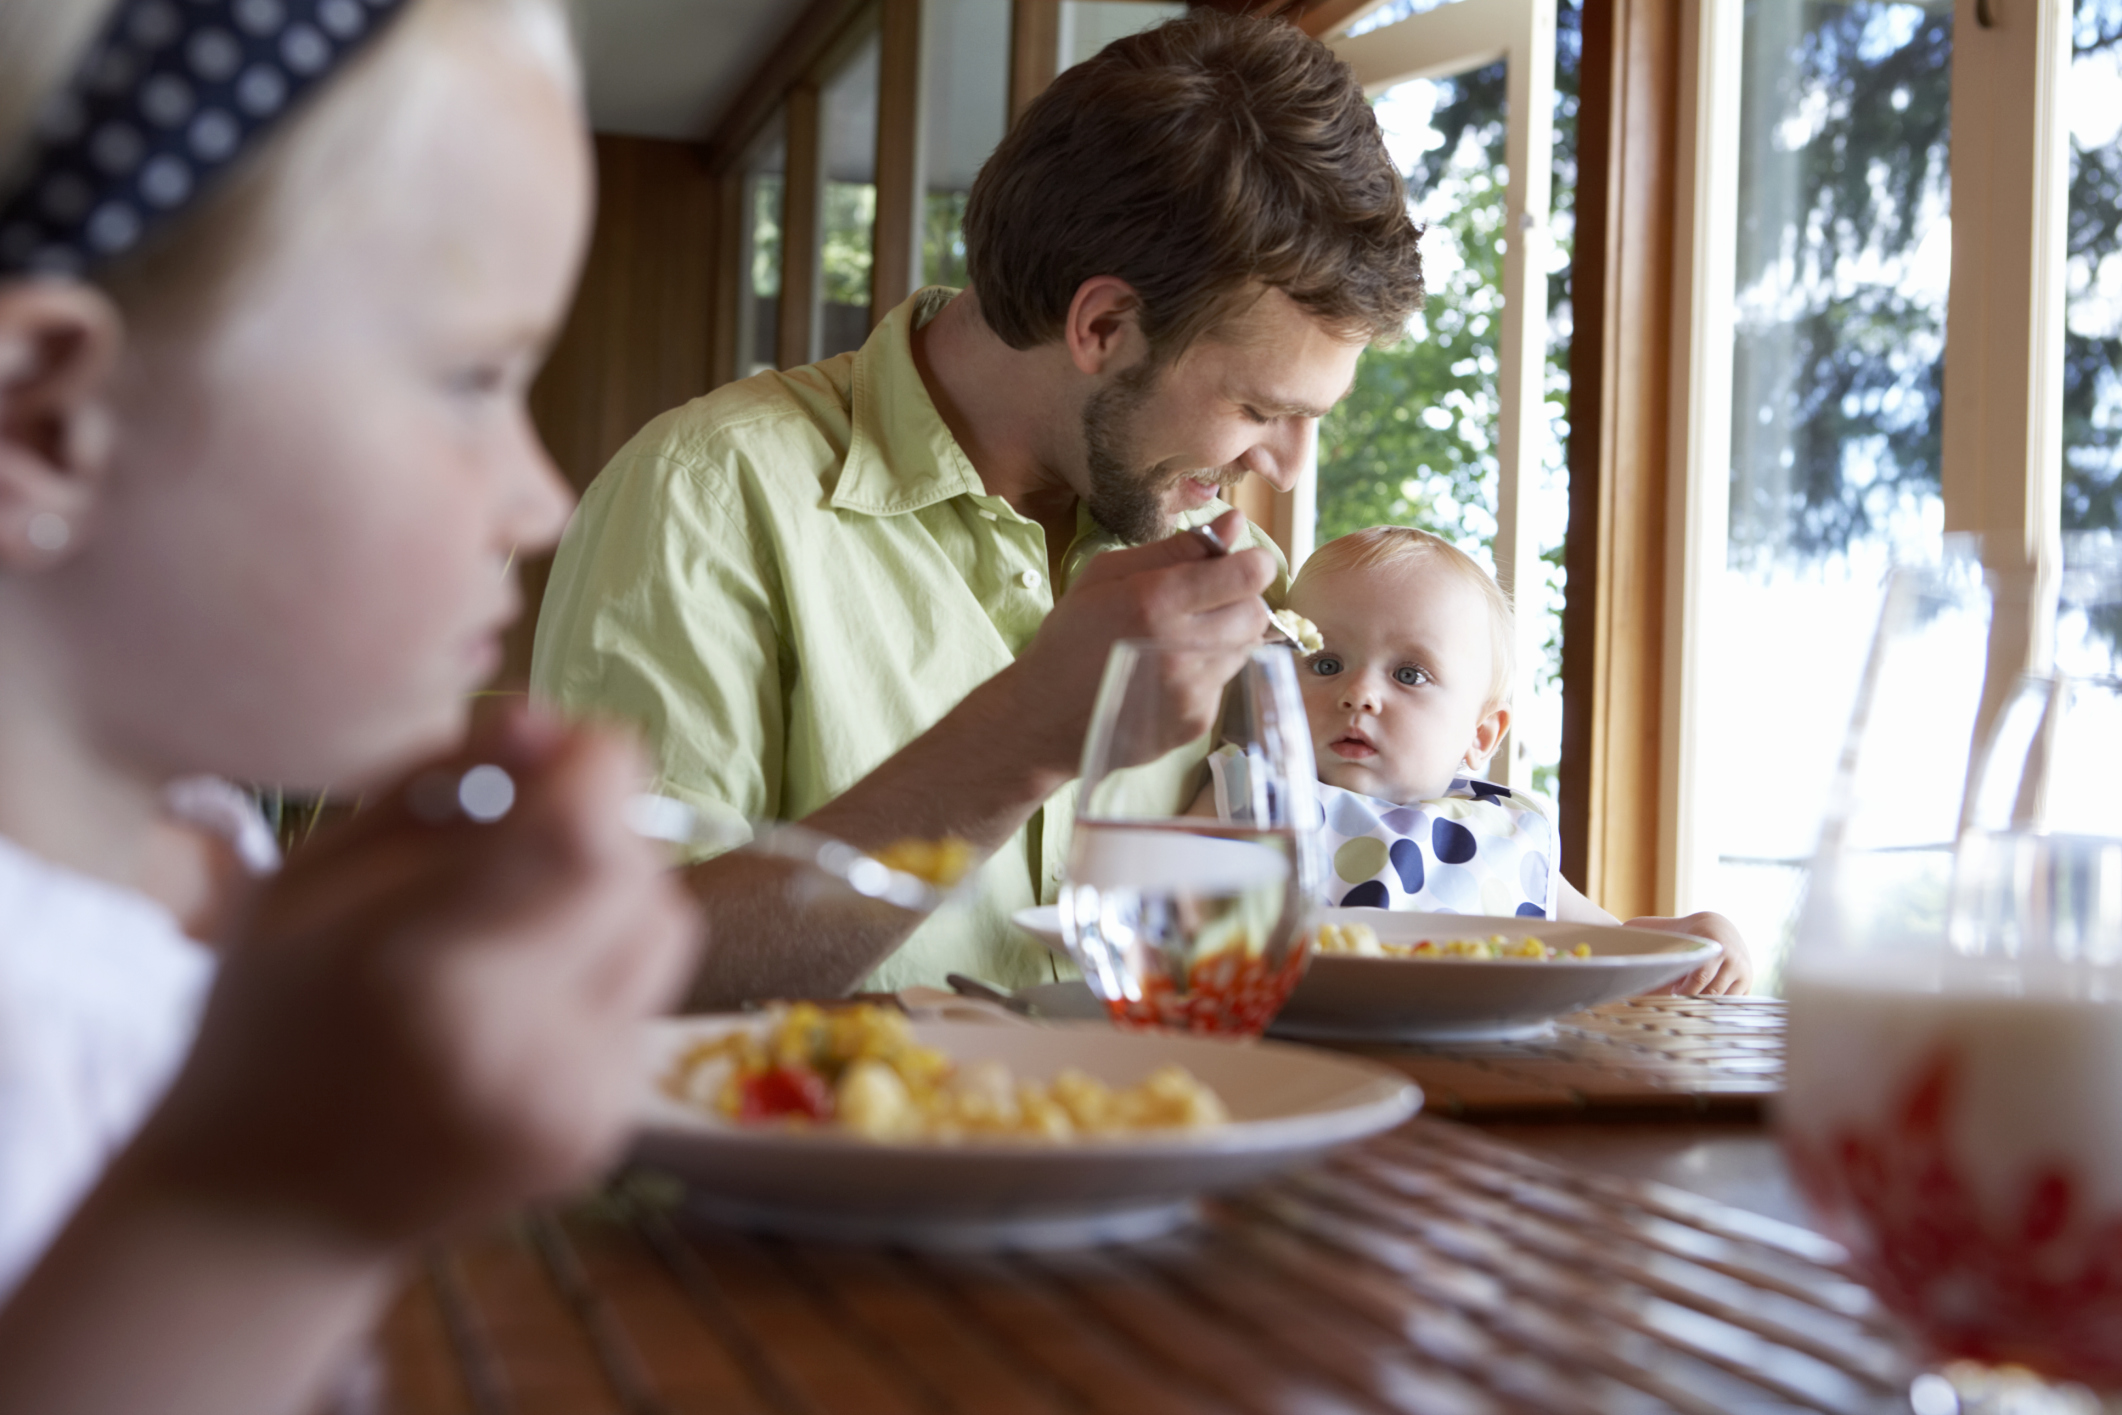 Study: Healthy eating habits begin at a young age